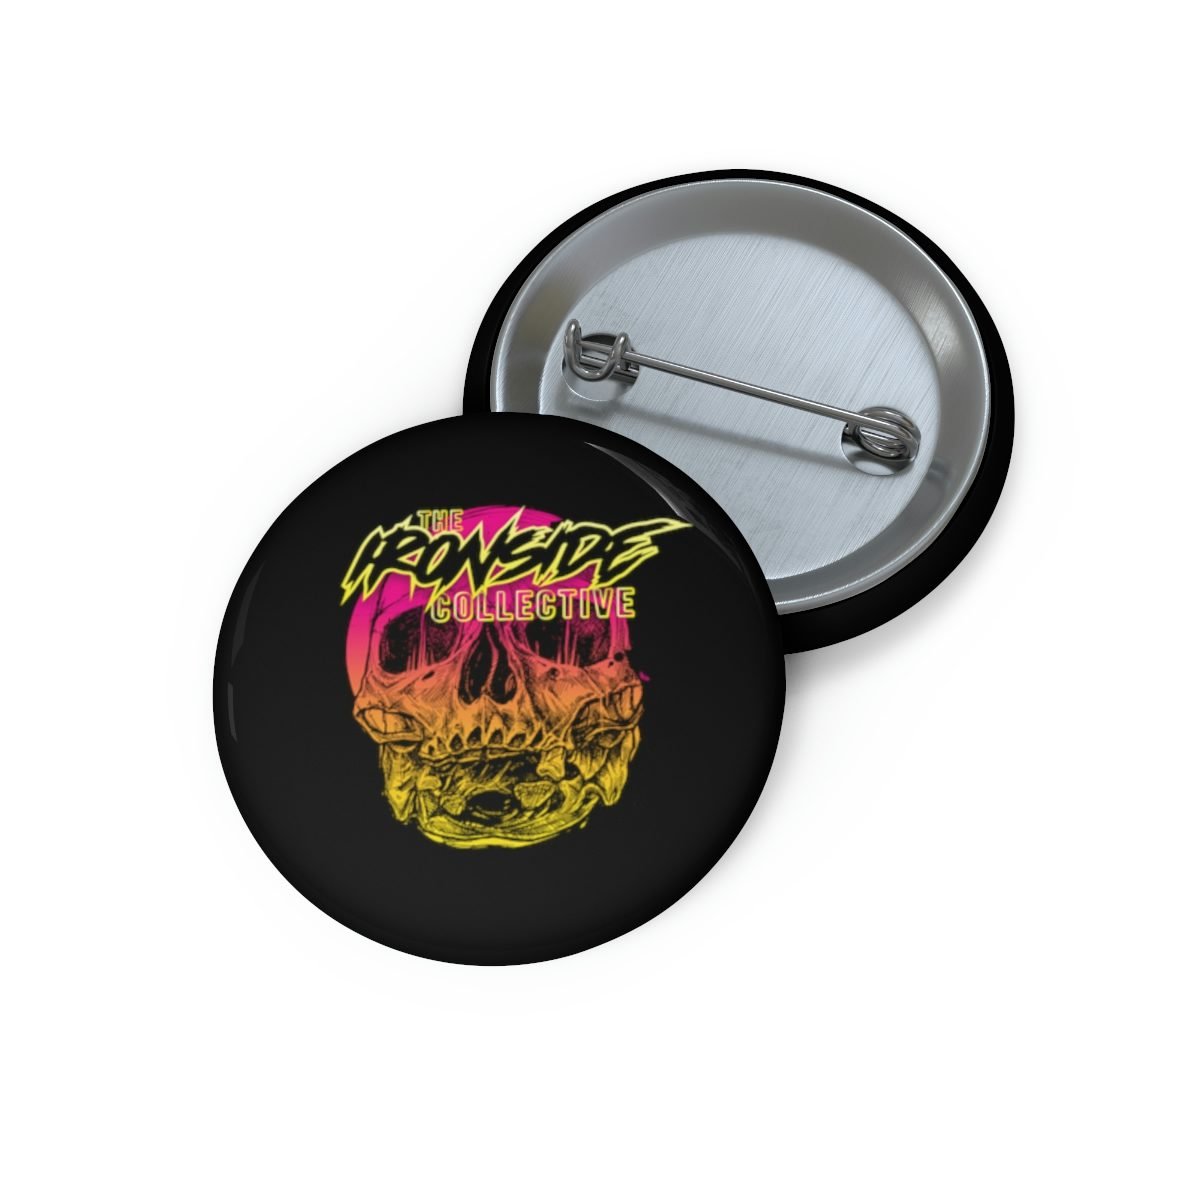 The Ironside Collective (The Charon Collective) Pin Buttons